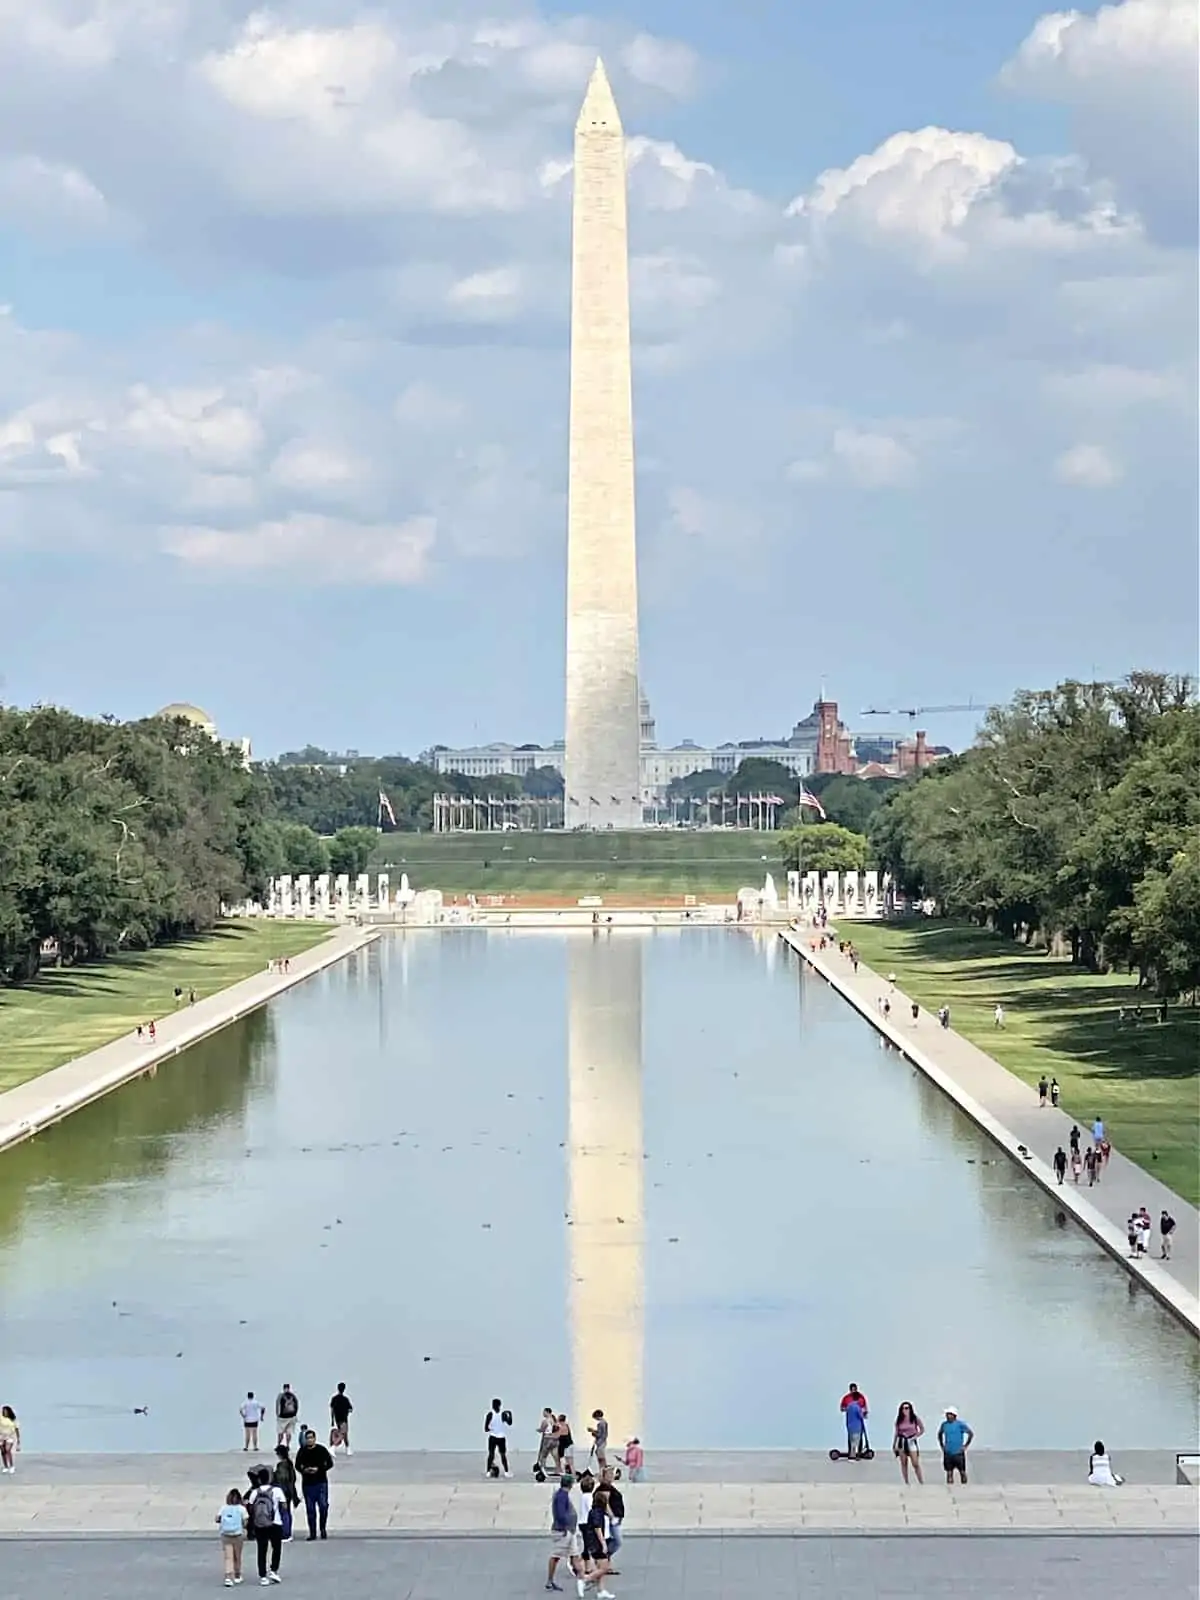 The Washington Monument and reflecting pool in front of the Lincoln Memorial.